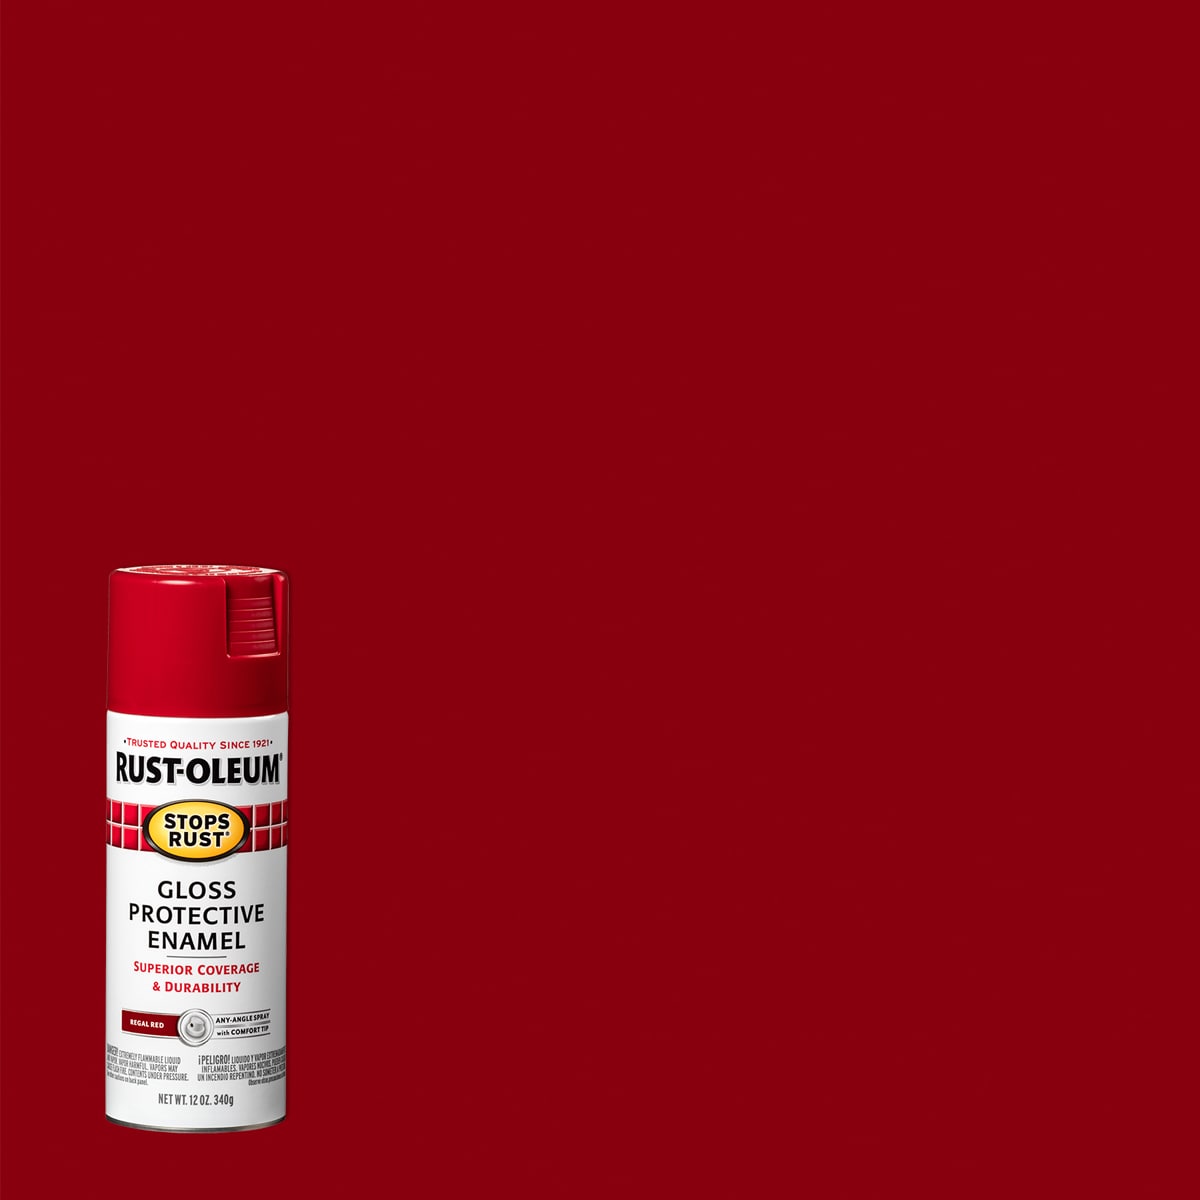 Painter's Touch 2x Ultra Cover Spray Paint, Colonial Red - 12 fl oz can